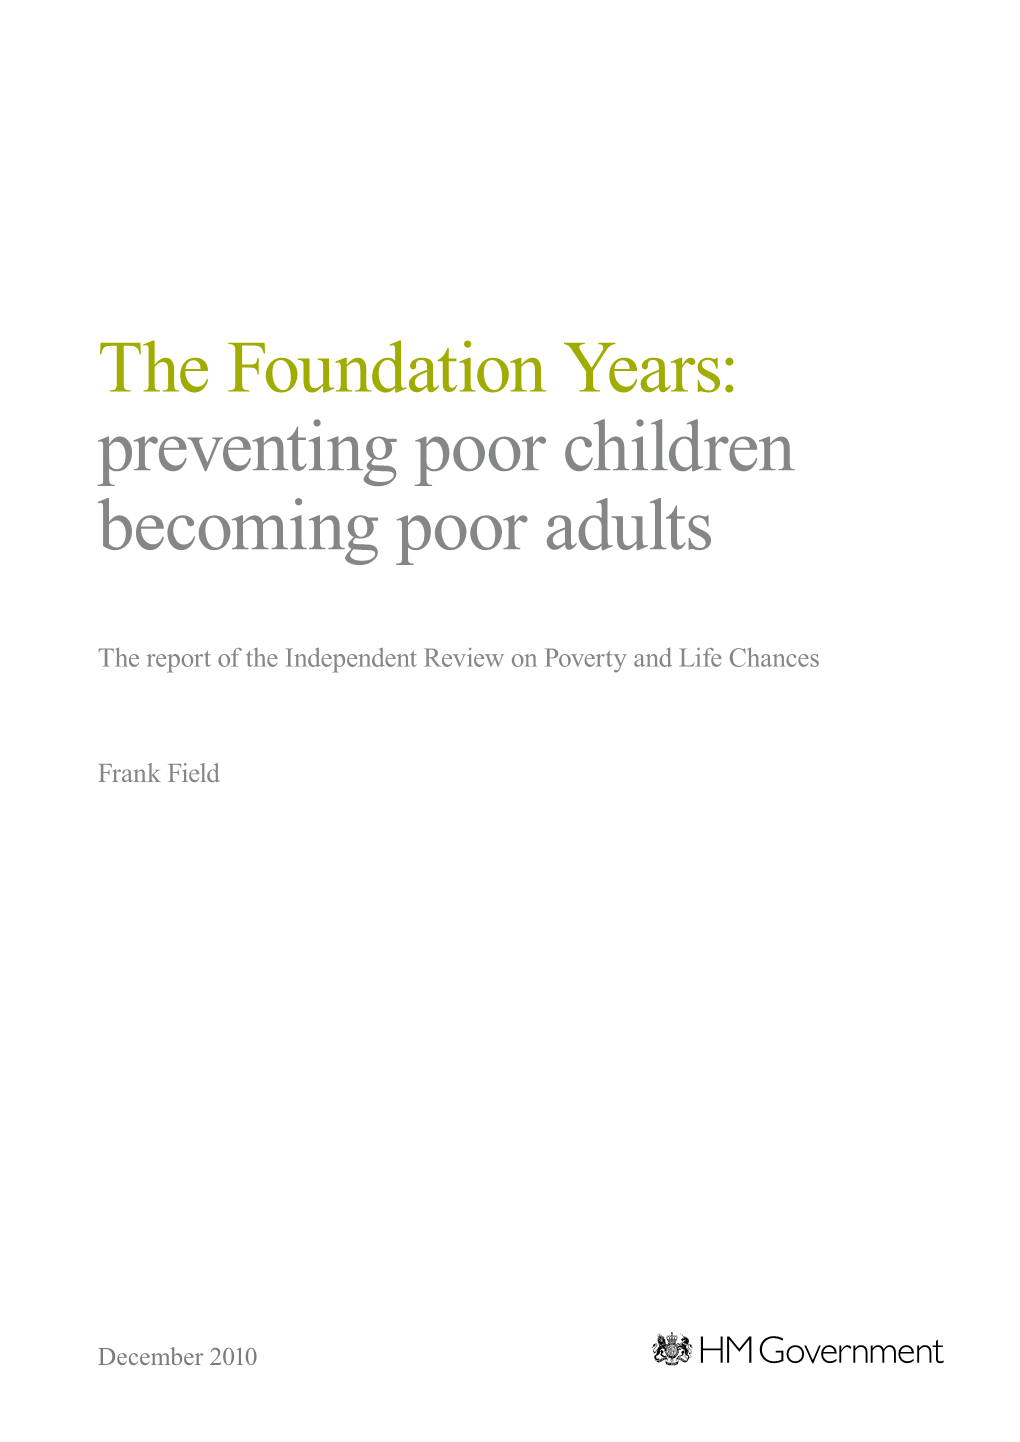 The Foundation Years: Preventing Poor Children Becoming Poor Adults